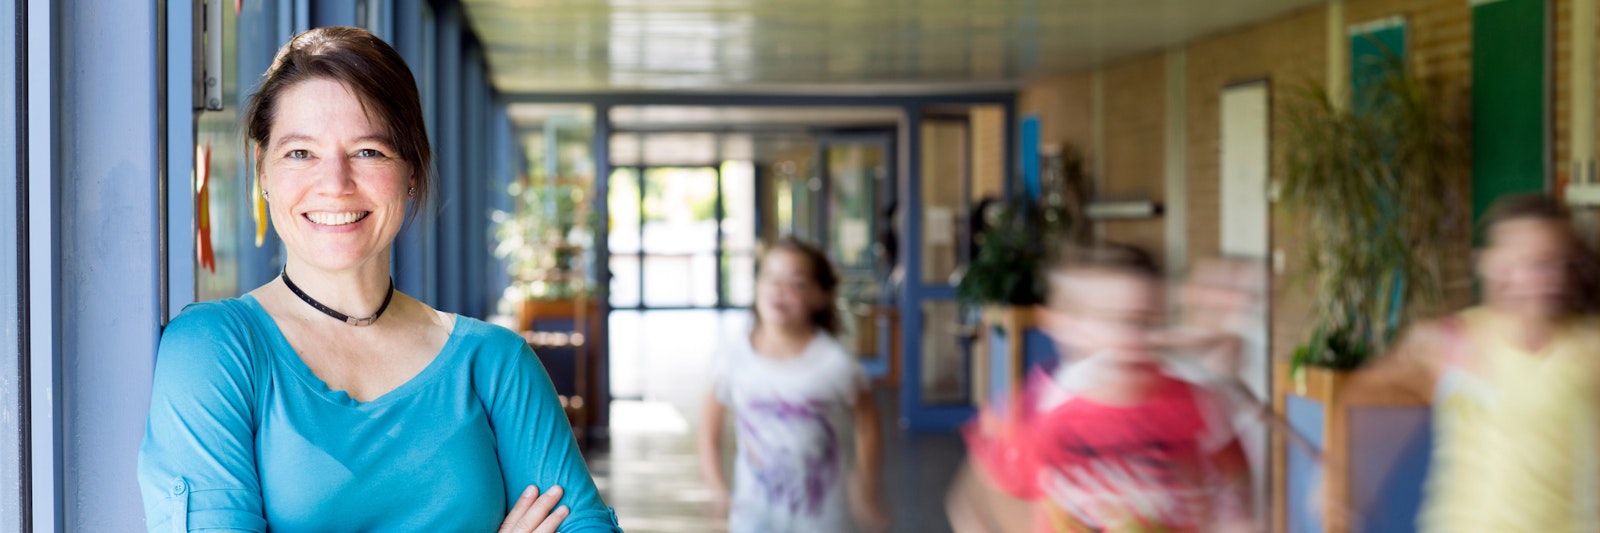 School leader smiling as she stands in a hallway while kids run past her.